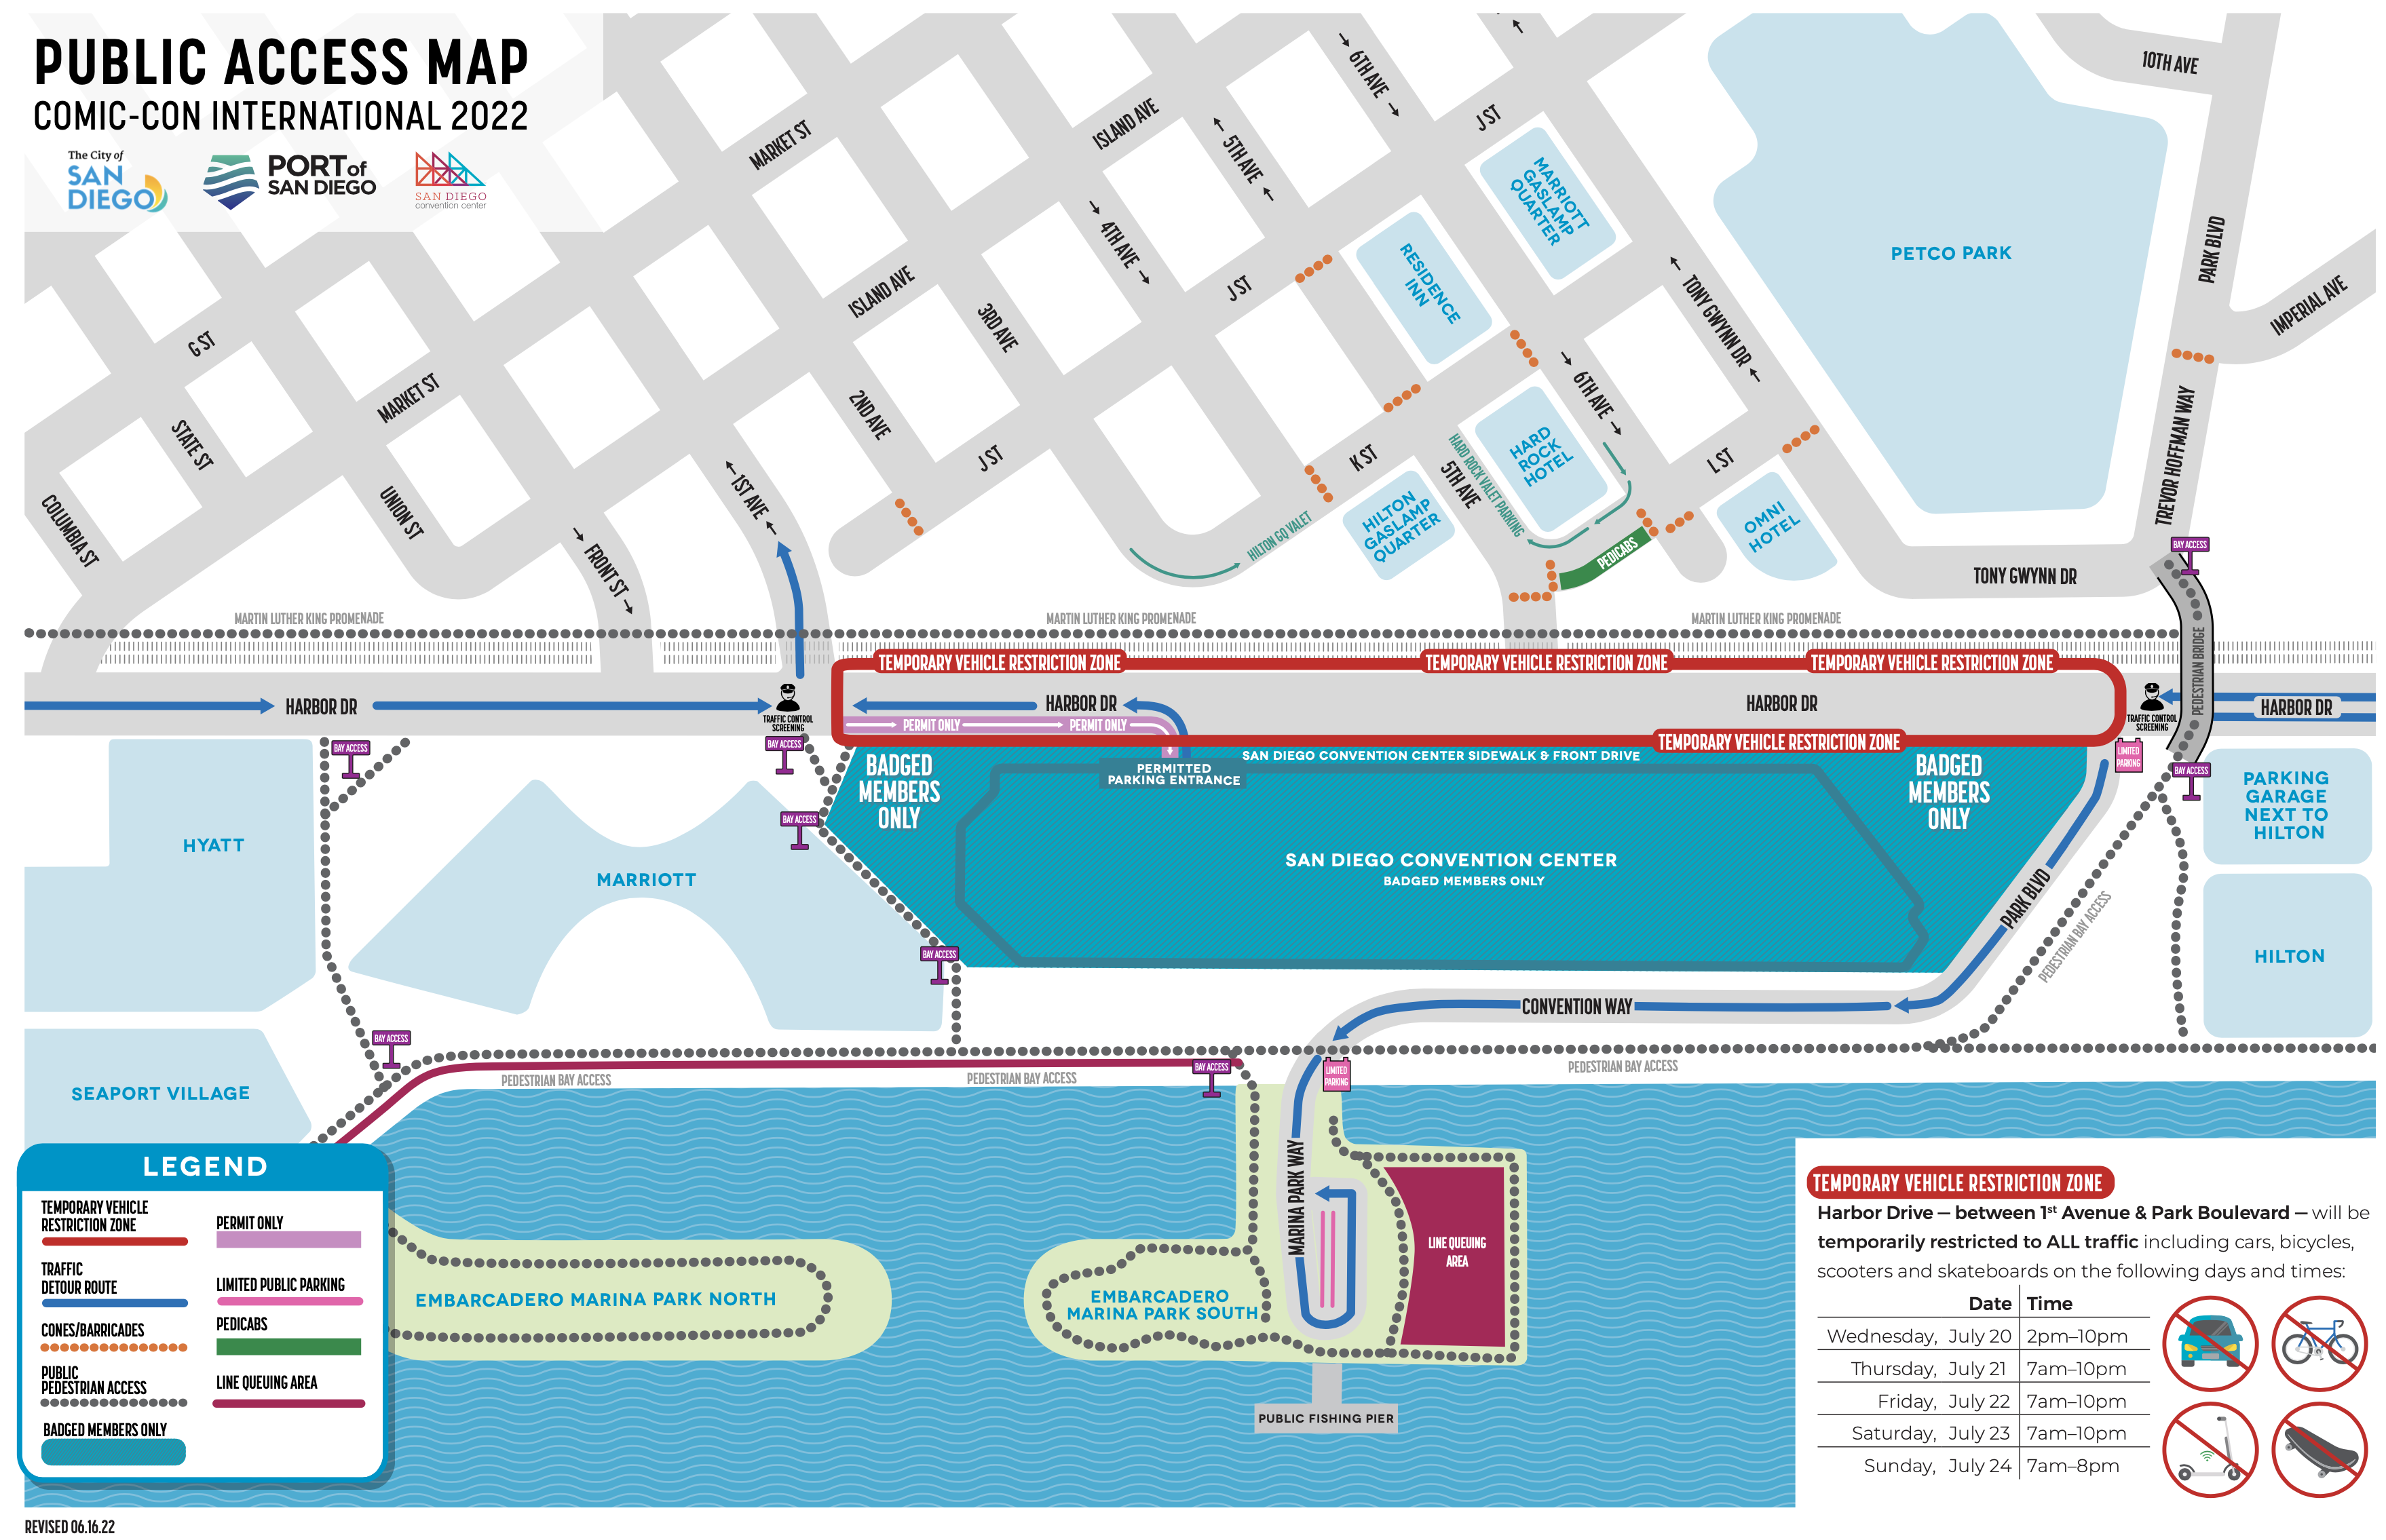 Map showing public access routes and areas which are for badge holders only around the San Diego Convention Center during Comic-Con 2022